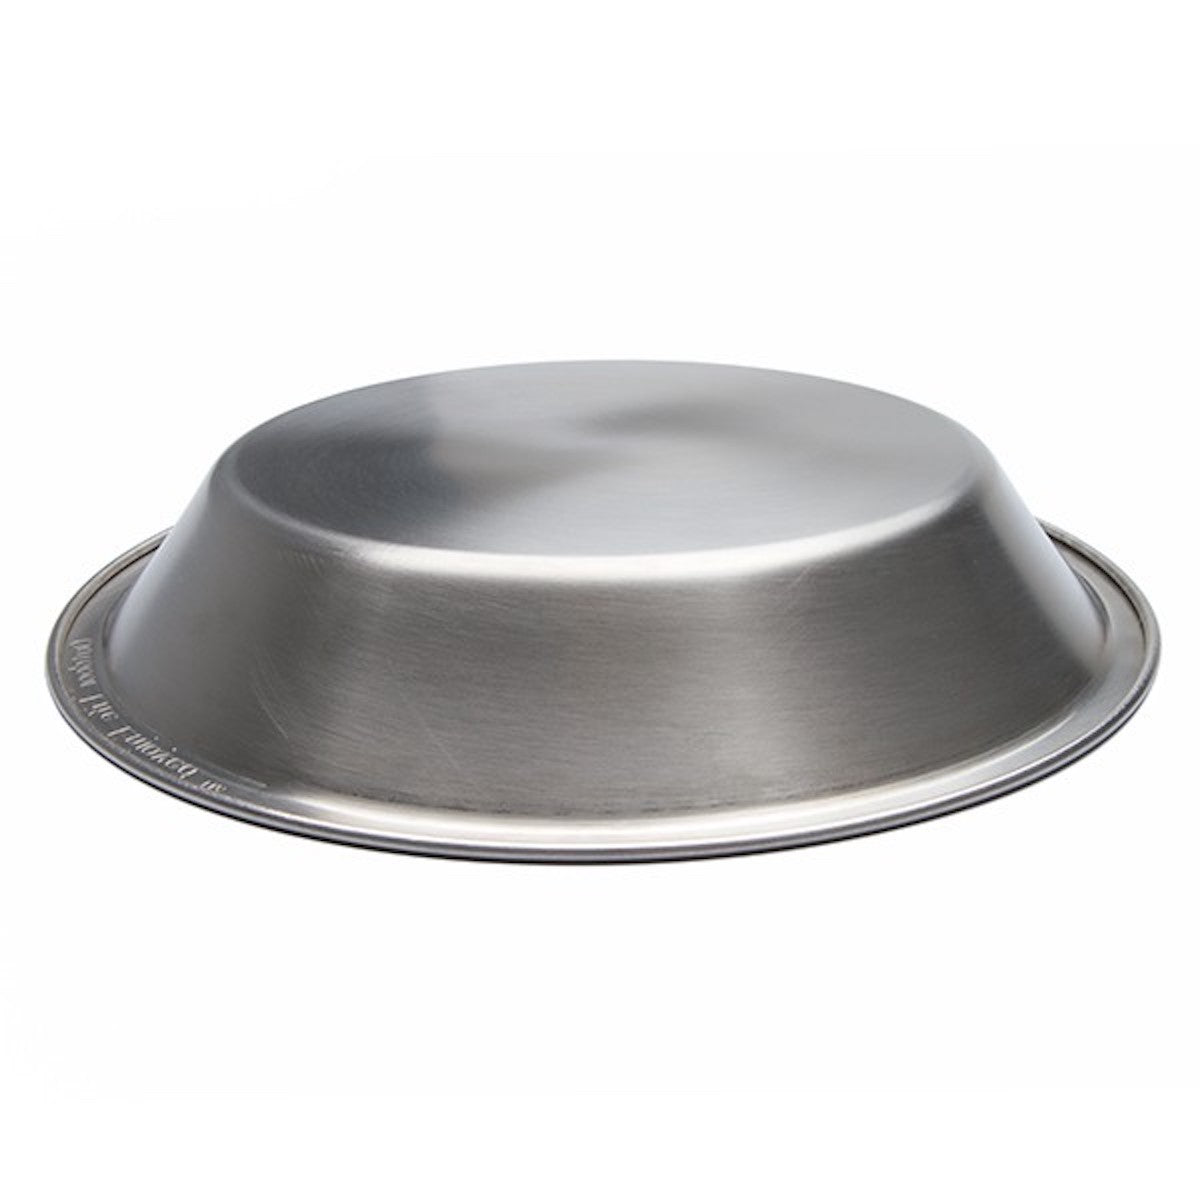 Kelly Kettle Camping Plates (2 Piece) Stainless Steel